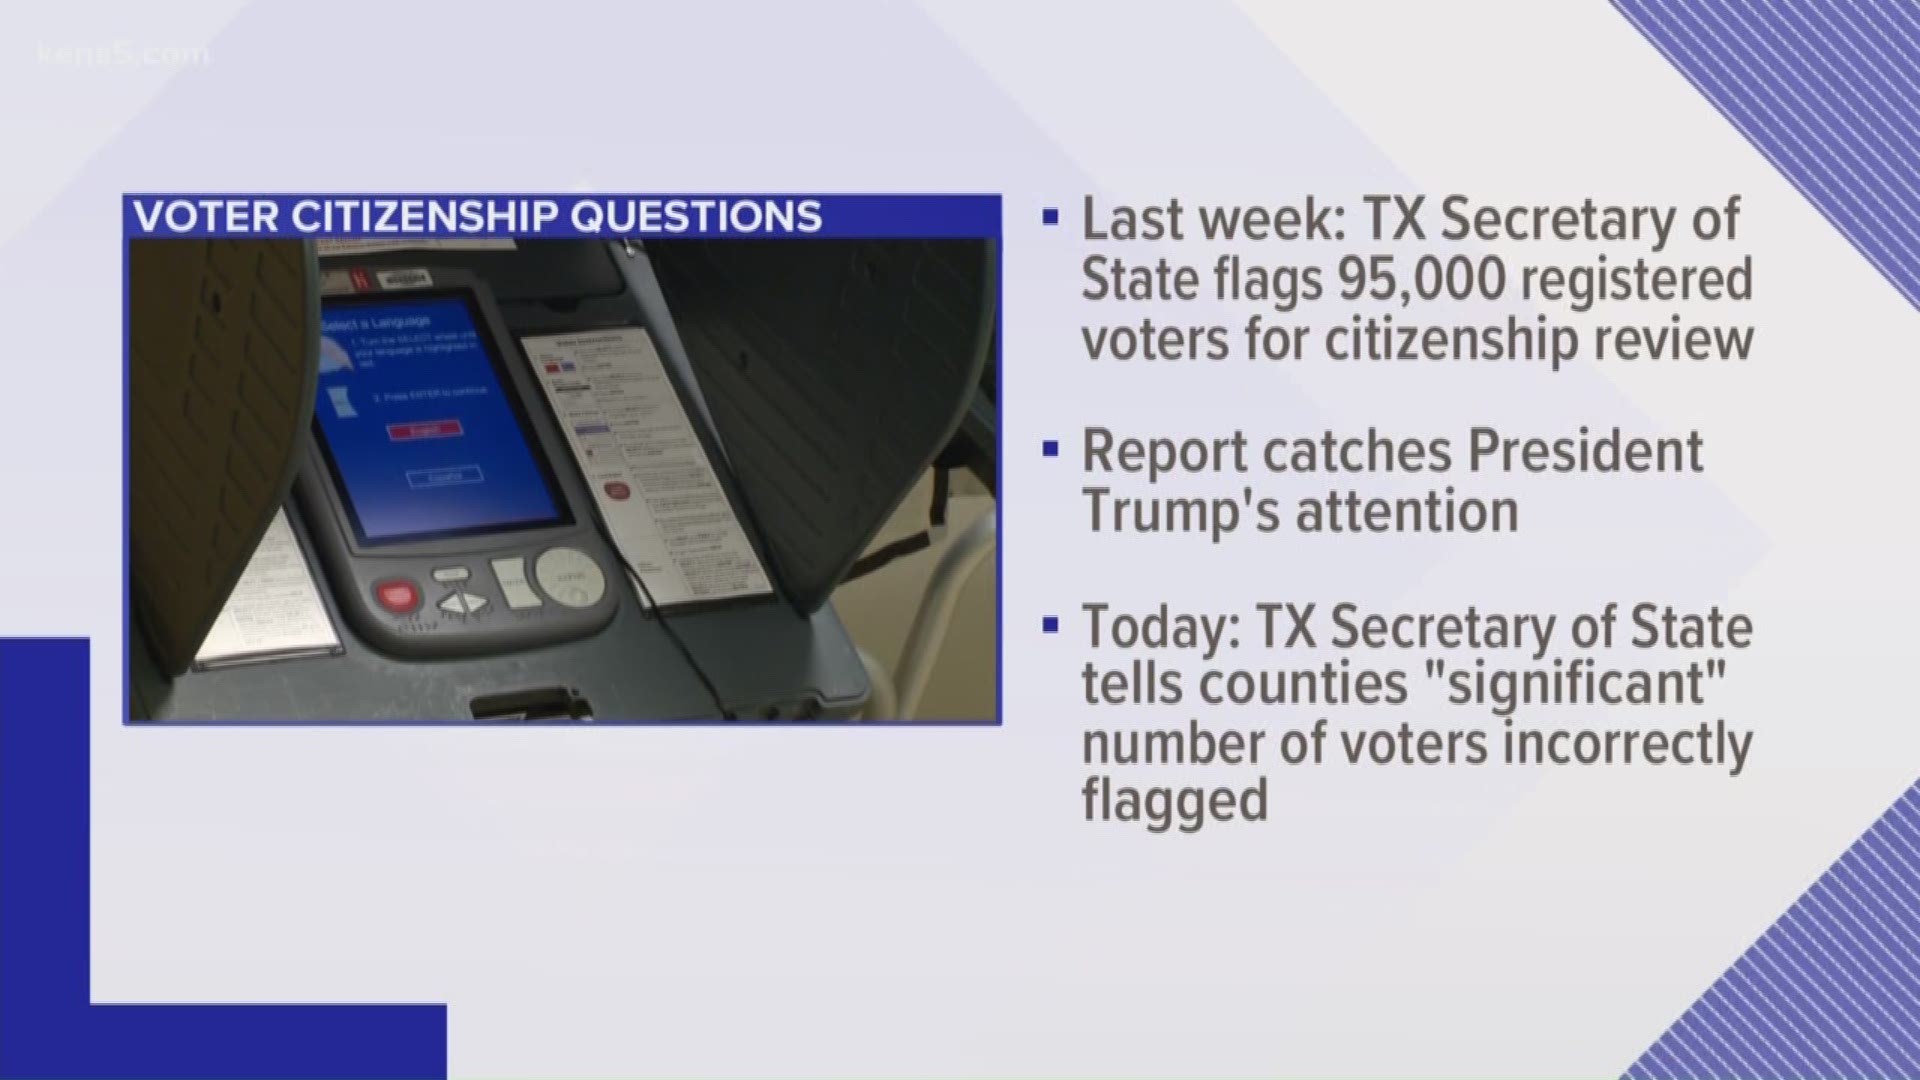 After flagging tens of thousands of registered voters for citizenship reviews, the Texas secretary of state’s office is now telling counties that some of those voters don’t belong on the lists they sent out.